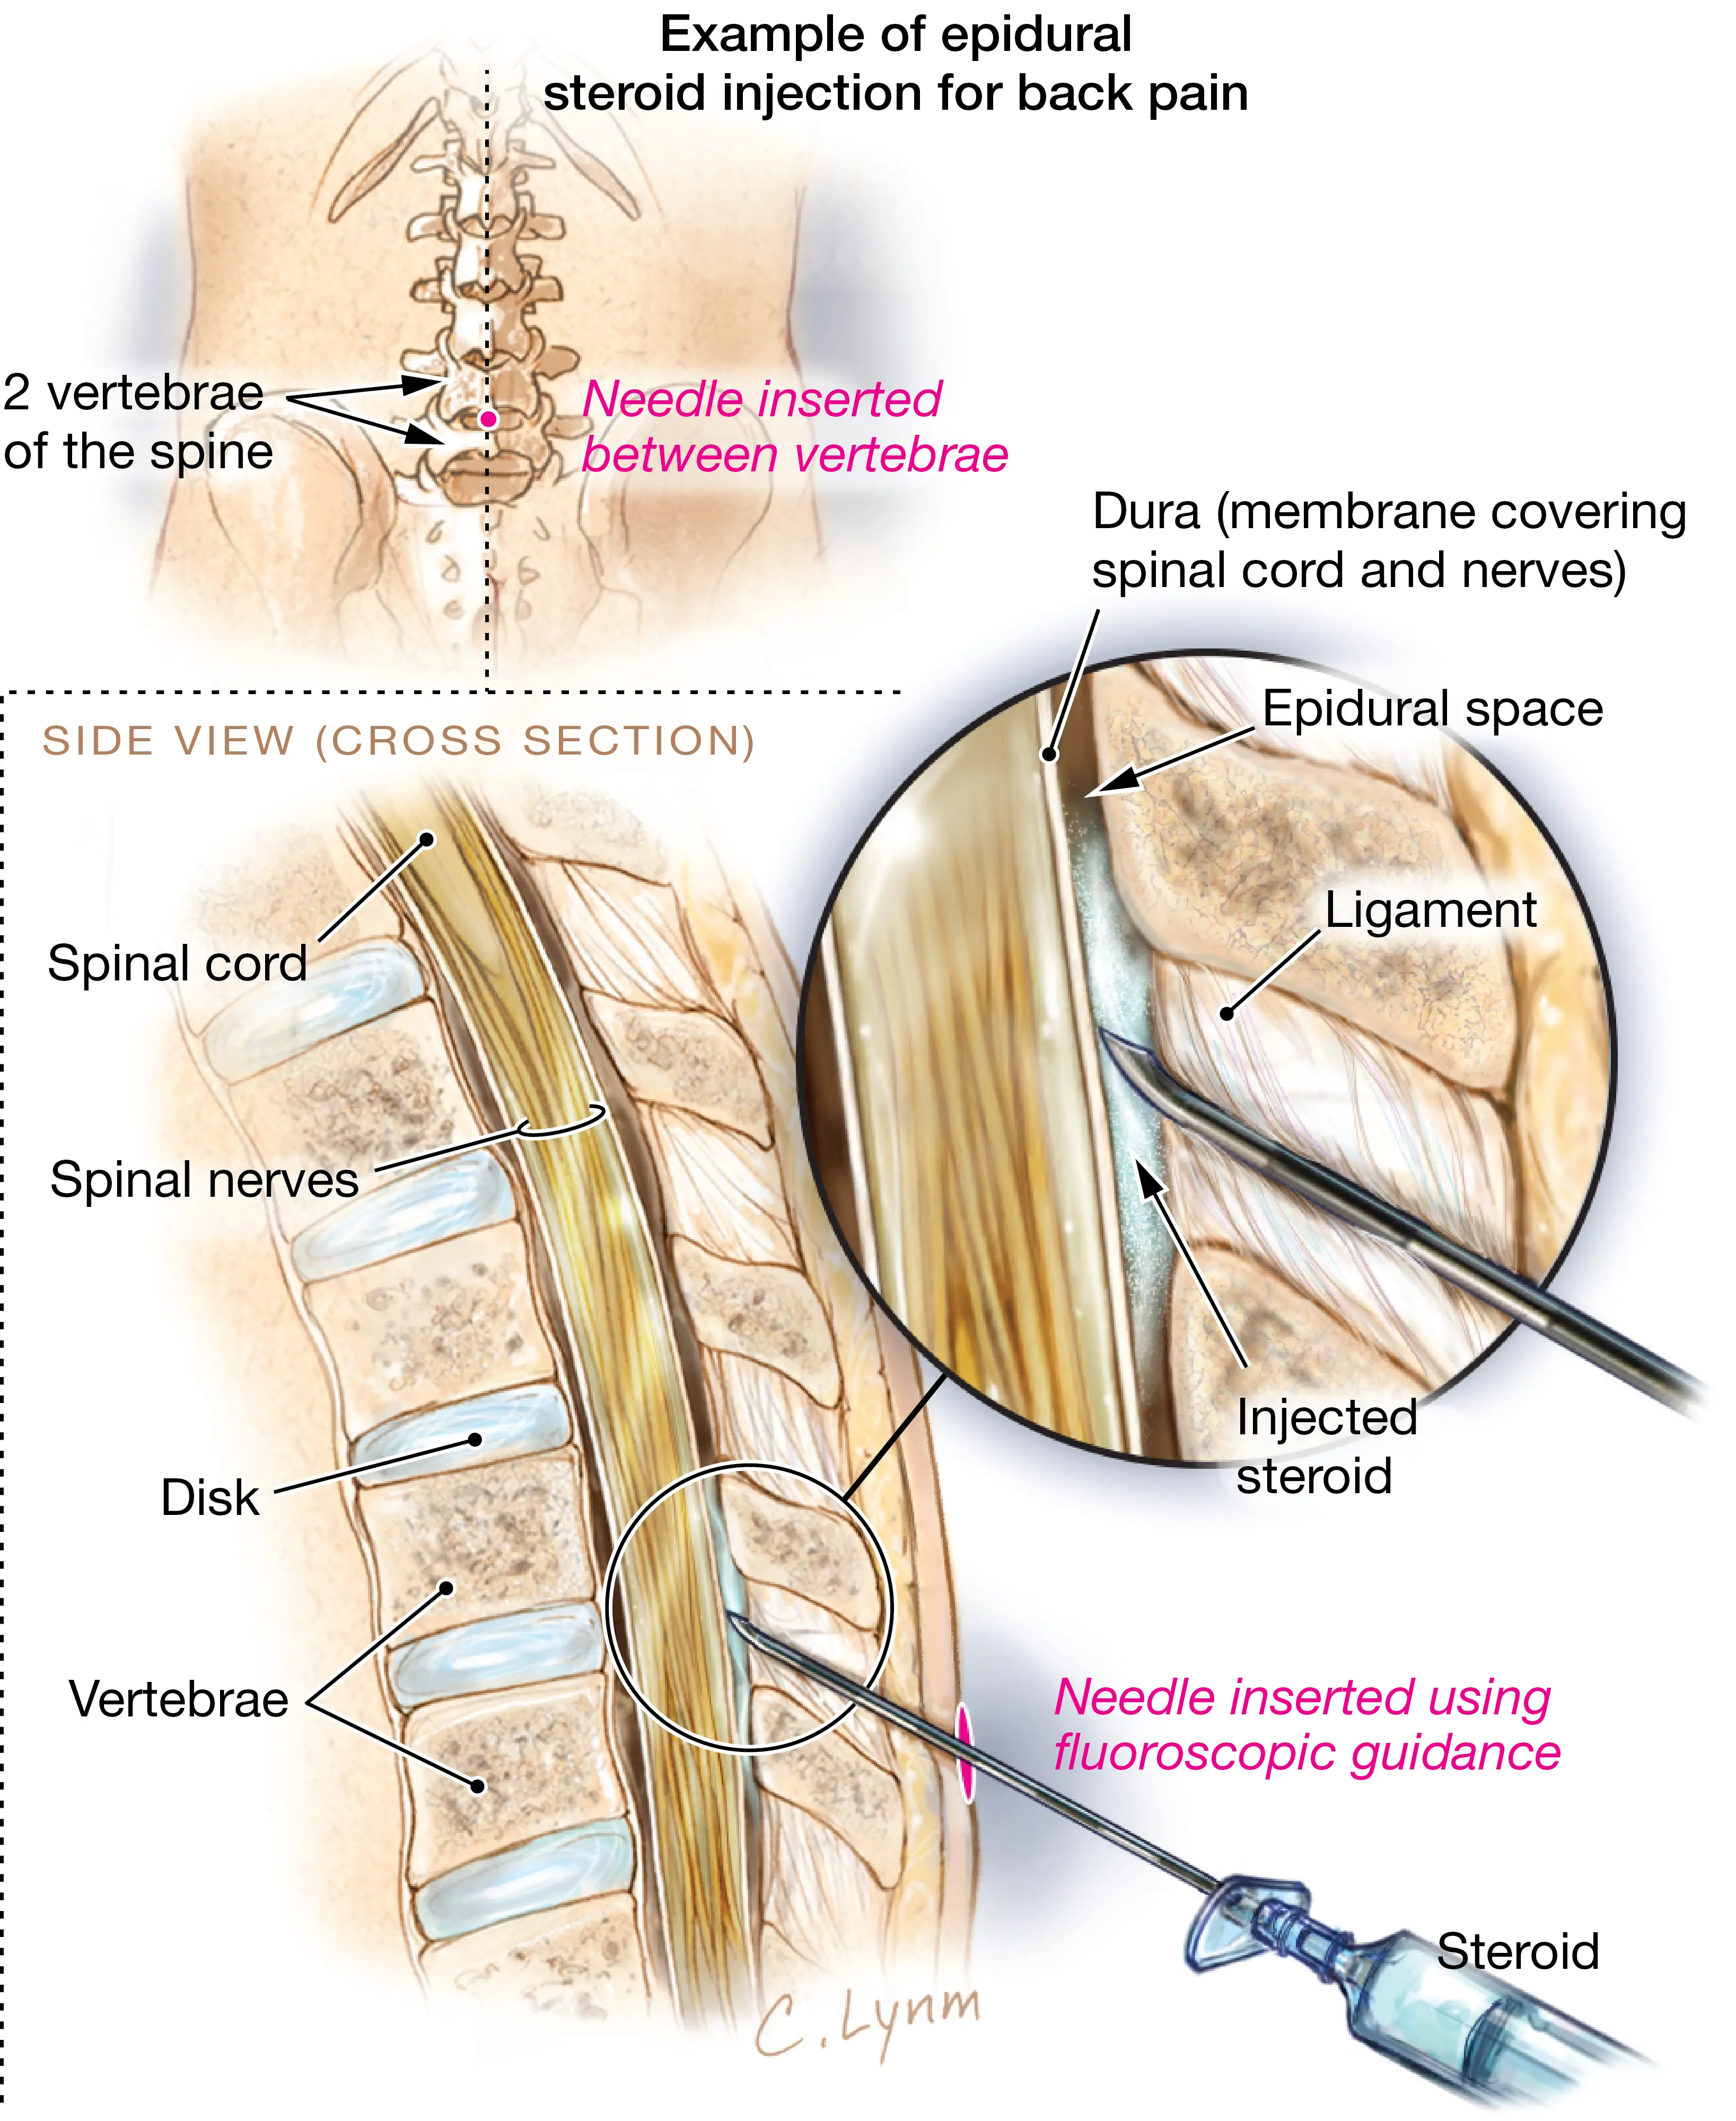 Steroid Injections to Treat Back Pain